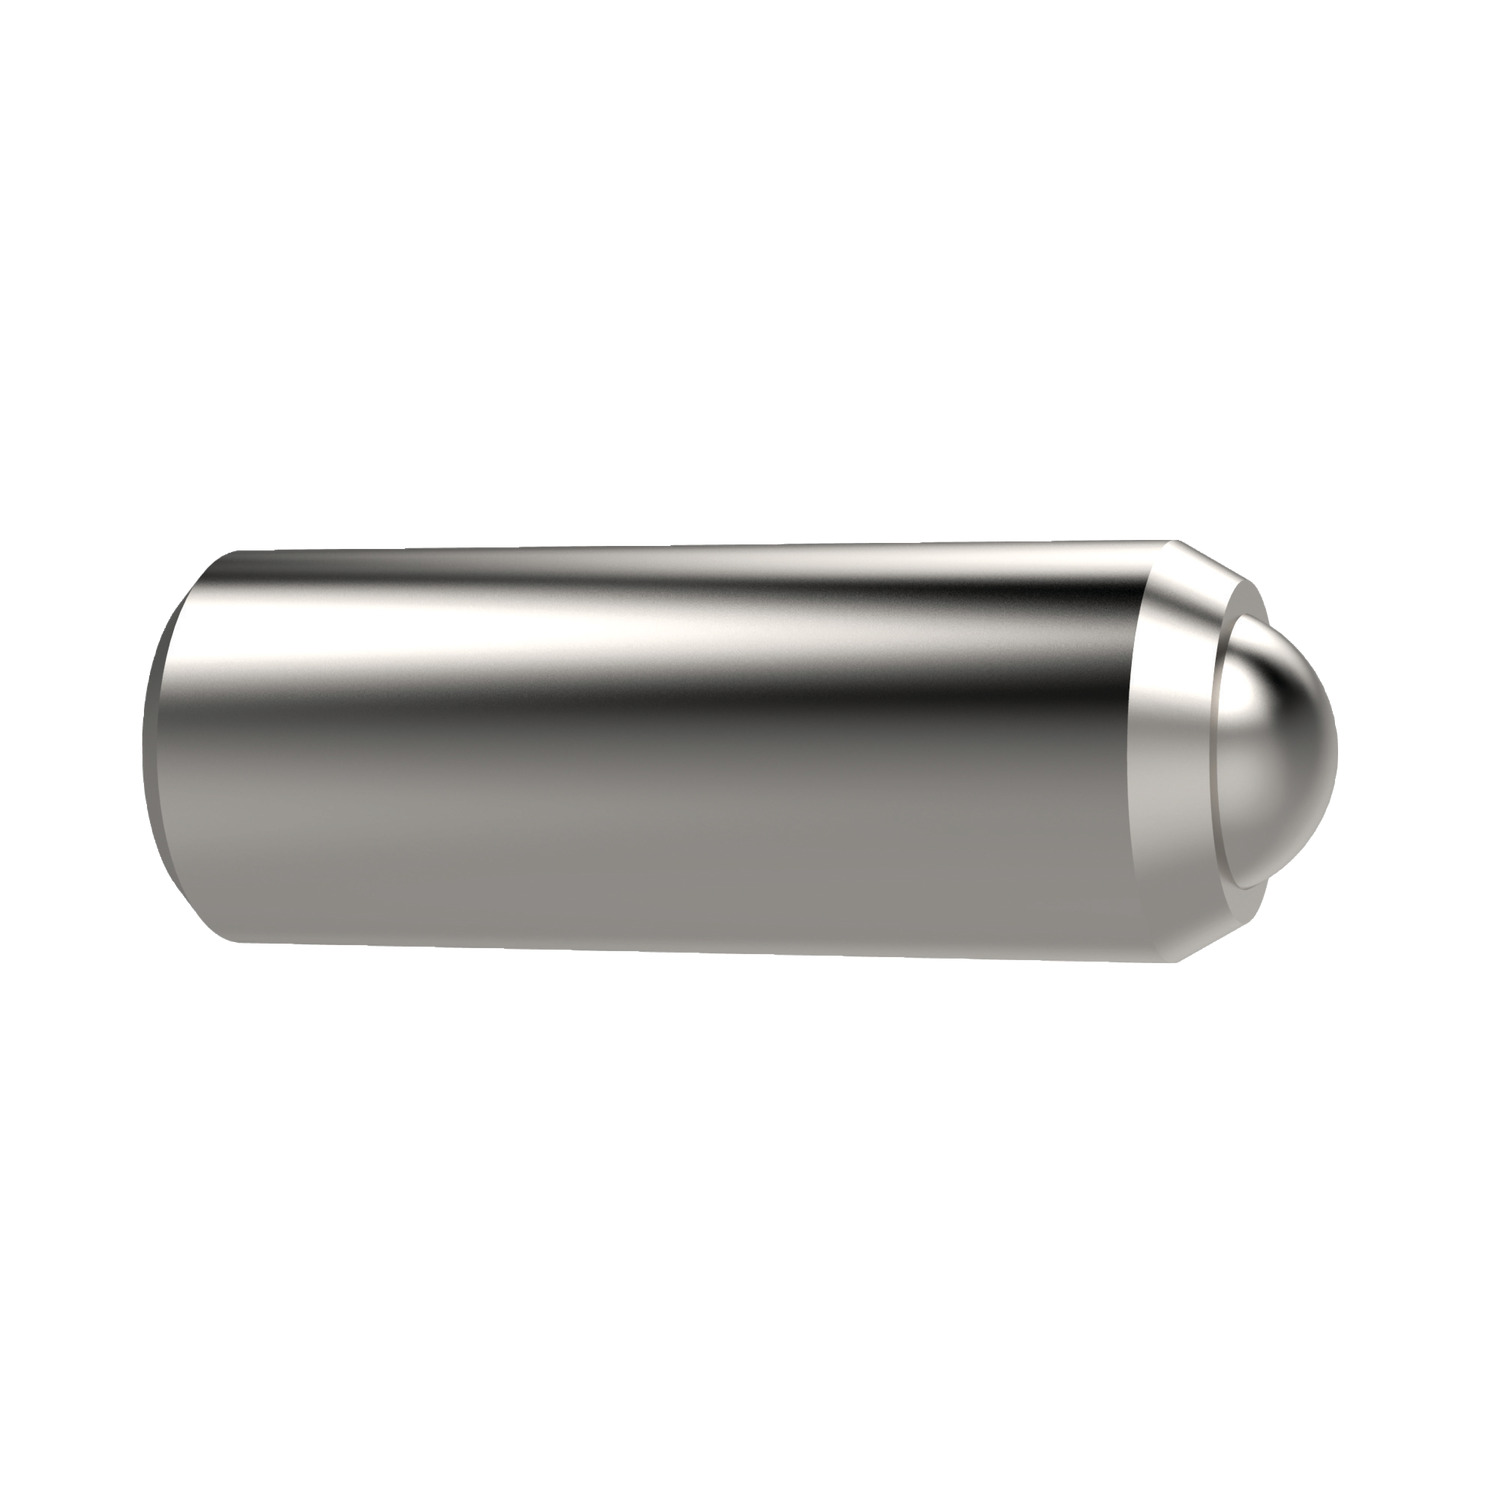 32280.W0358 Spring Plunger - Ball - Smooth Model All Stainless - 2,5 - 1,5 - 5,0 EC:20253059 WG:05063052078743